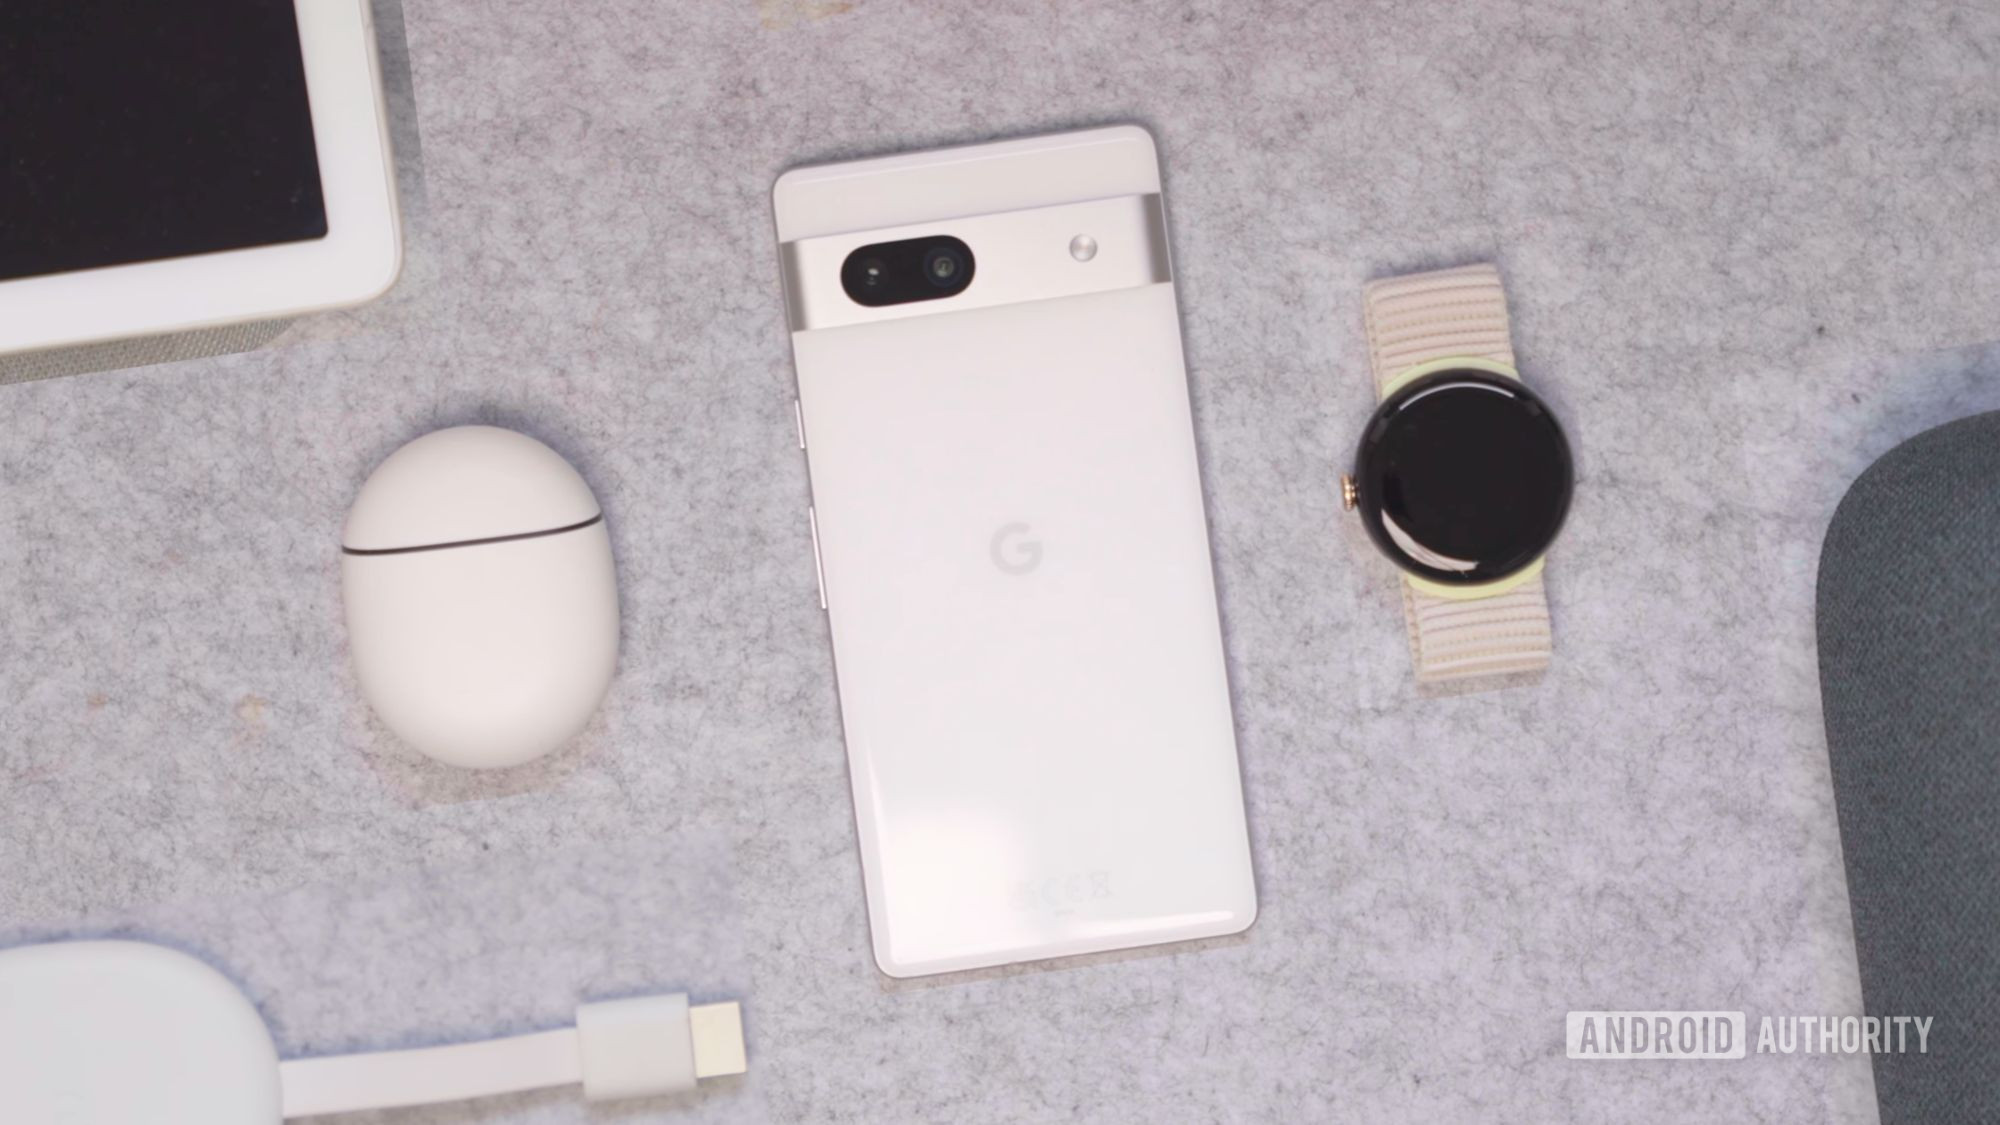 Google’s Warranty Helper tool simplifies support for Pixels and Google Nest products